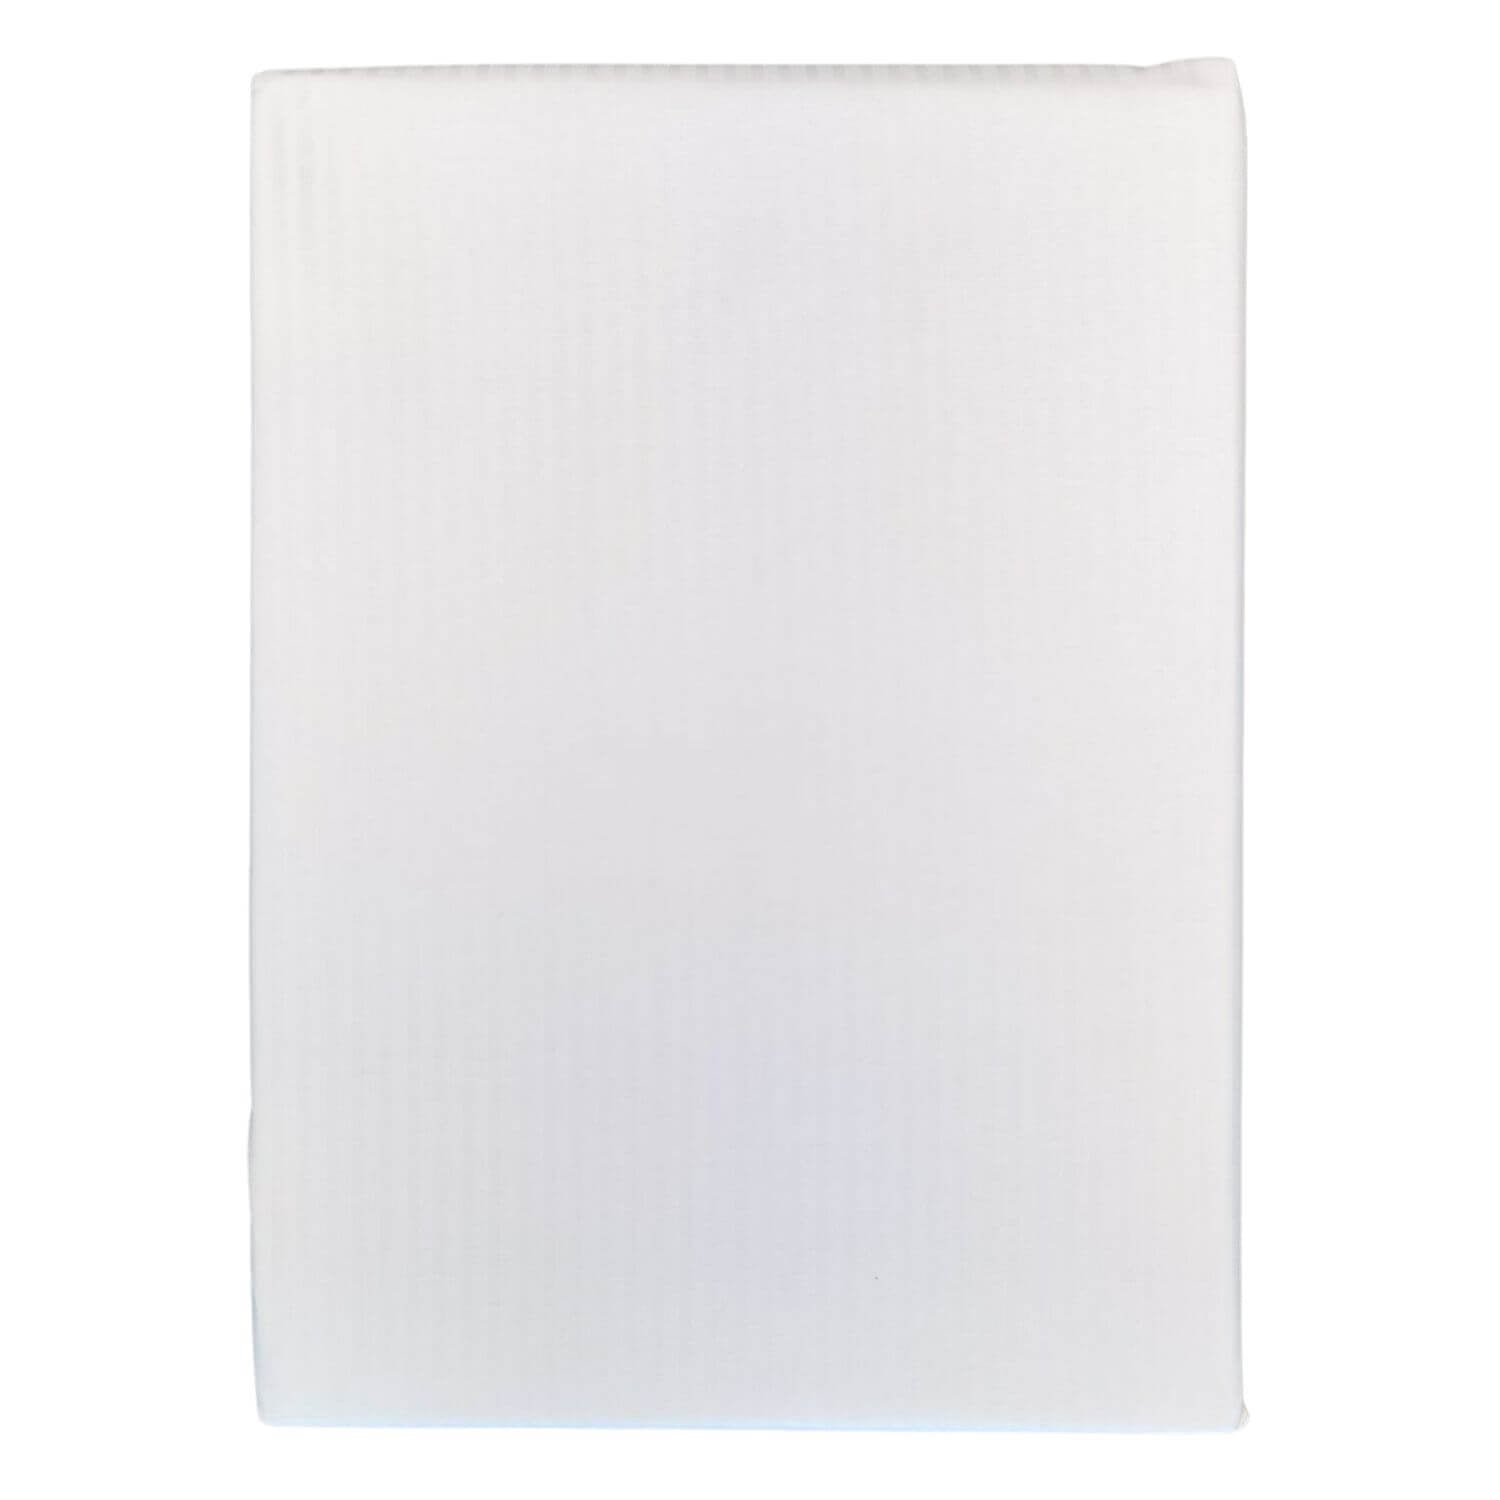 The Home Bedroom 300 Thread Count Satin Stripe Fitted Sheet - White 2 Shaws Department Stores